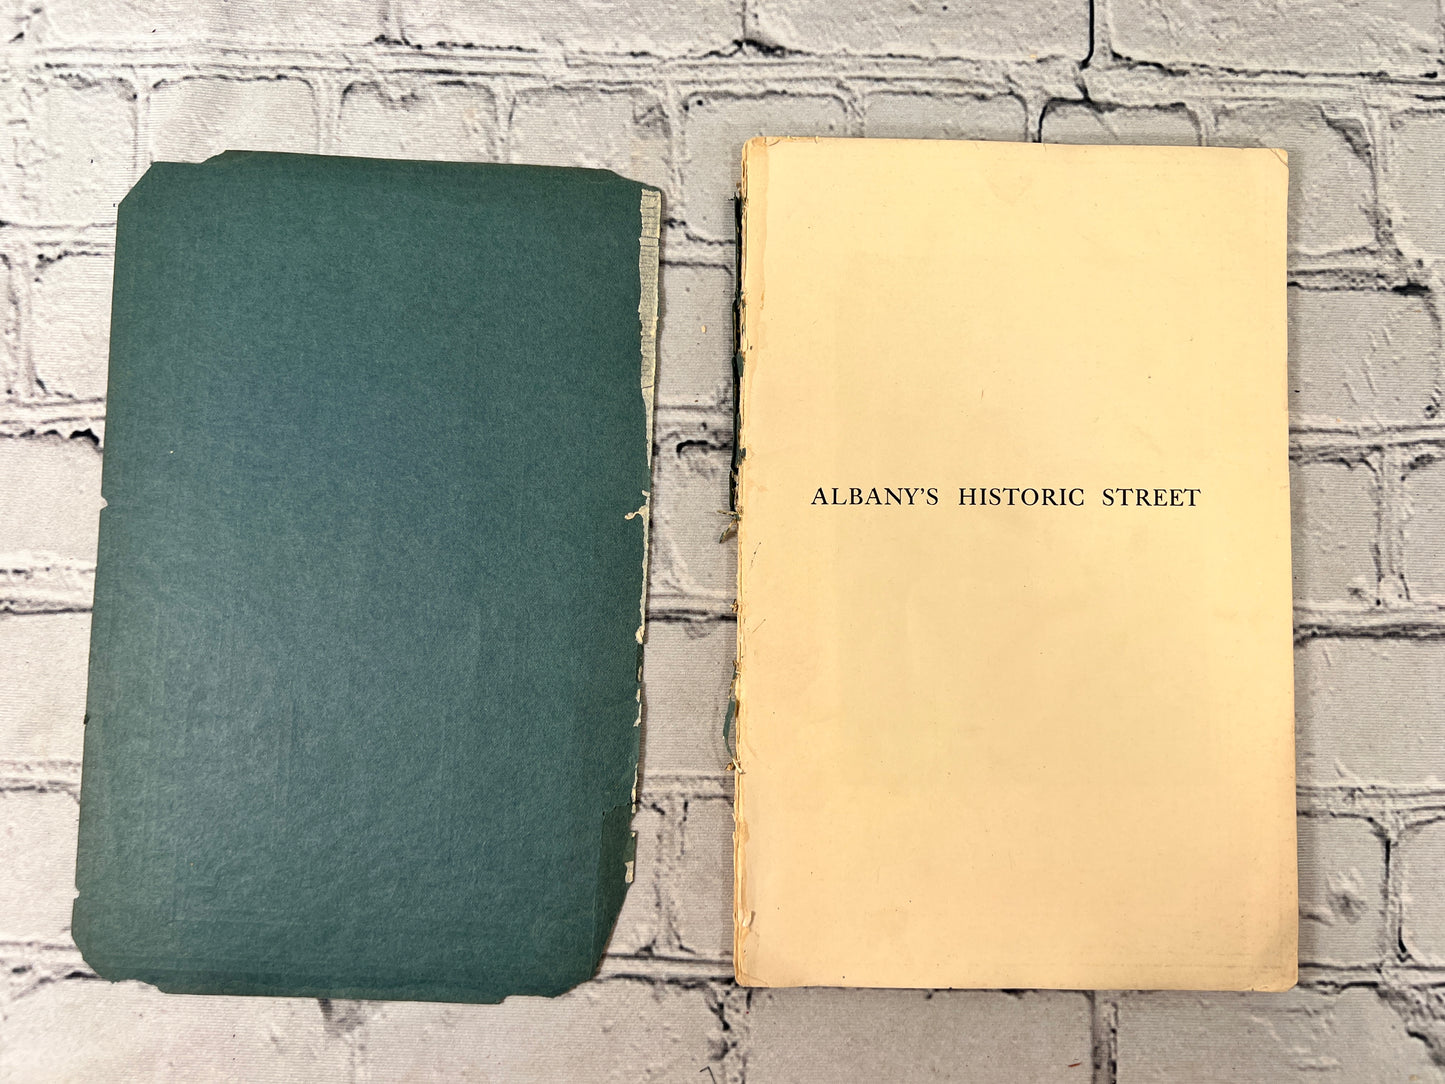 Albany's Historic Street by The National Savings Bank of the City of Albany [1918]